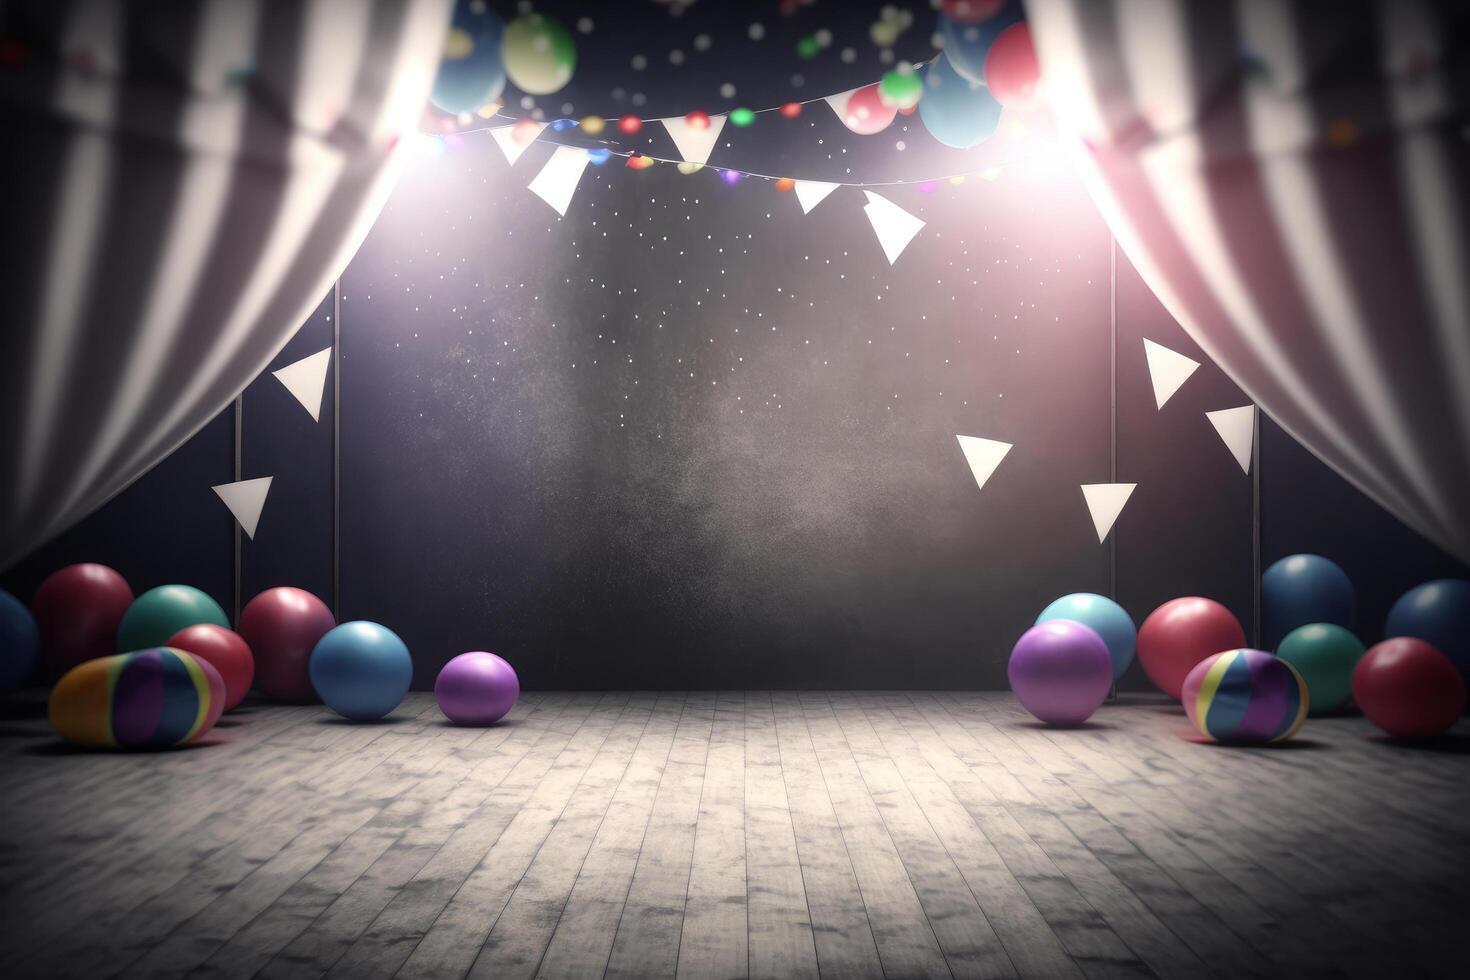 Festive party with balloons, stage and garlands. Illustration photo